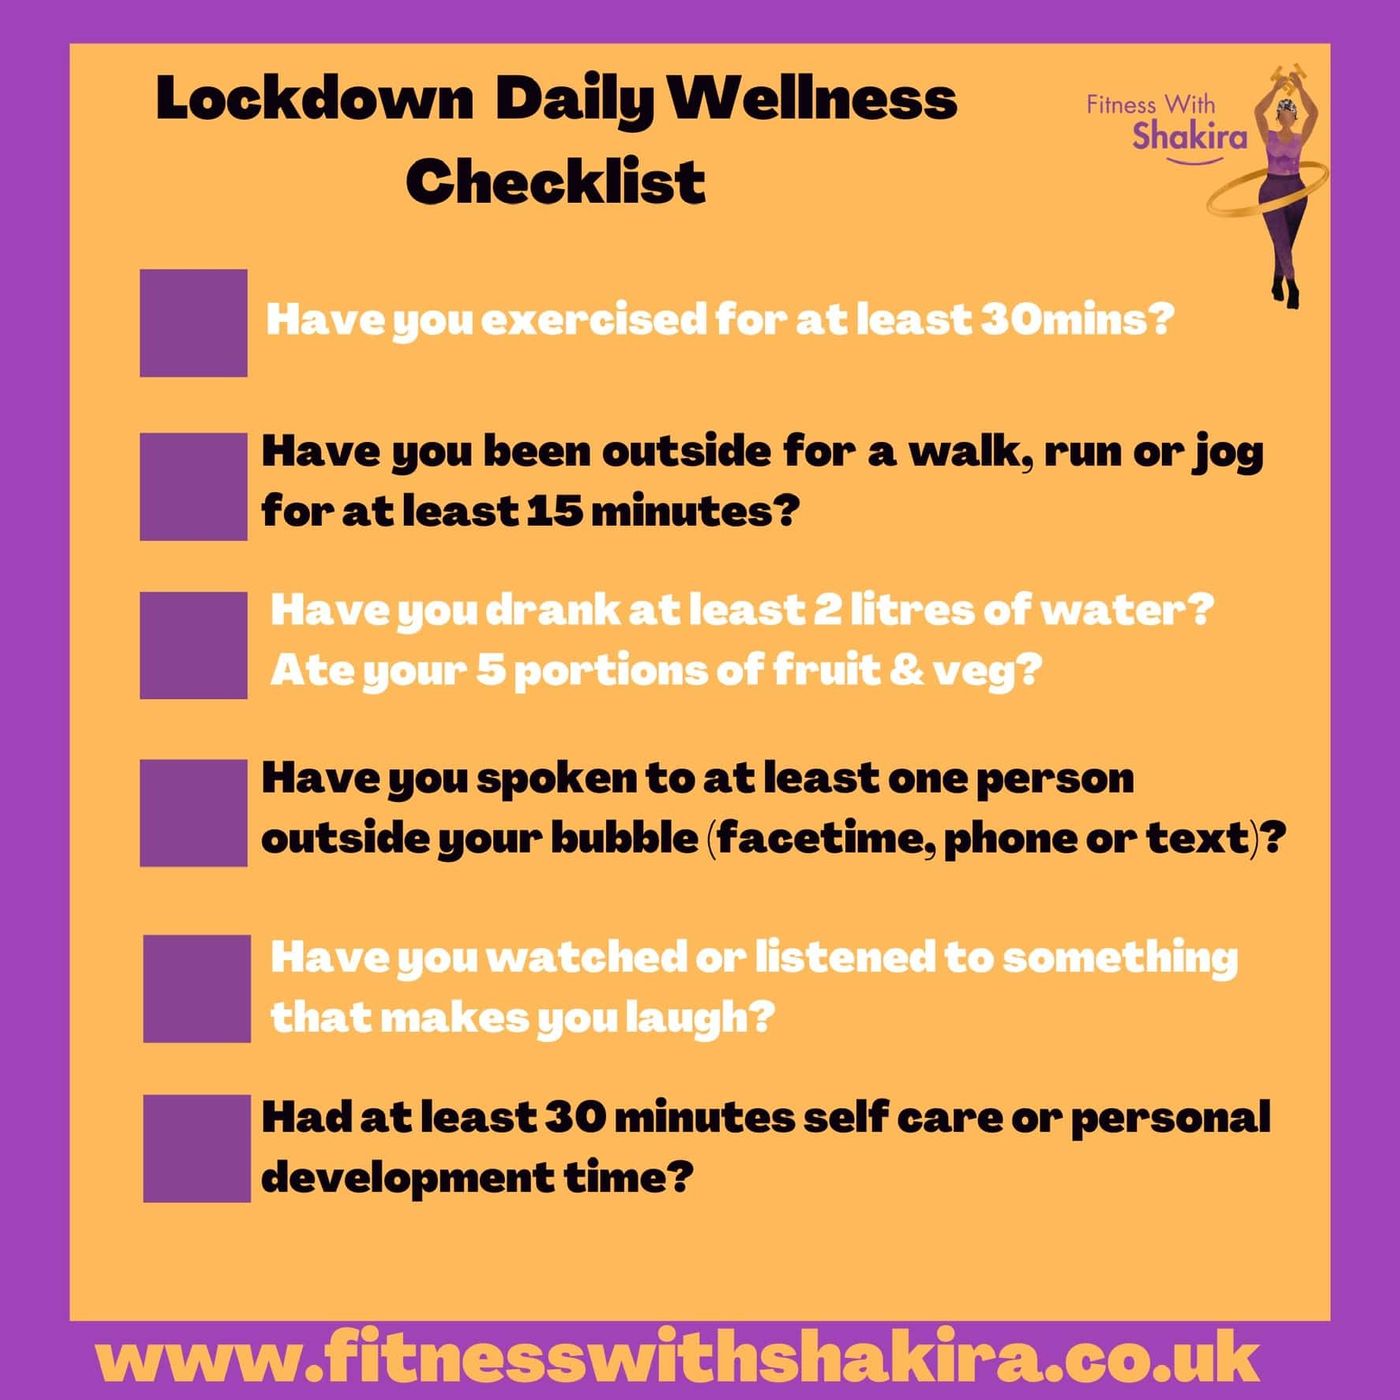 Happy Sunday Bua Fit family
Sharing my little daily wellness checklist that you may find useful to get you through the next few weeks and beyond.
Shak.😘